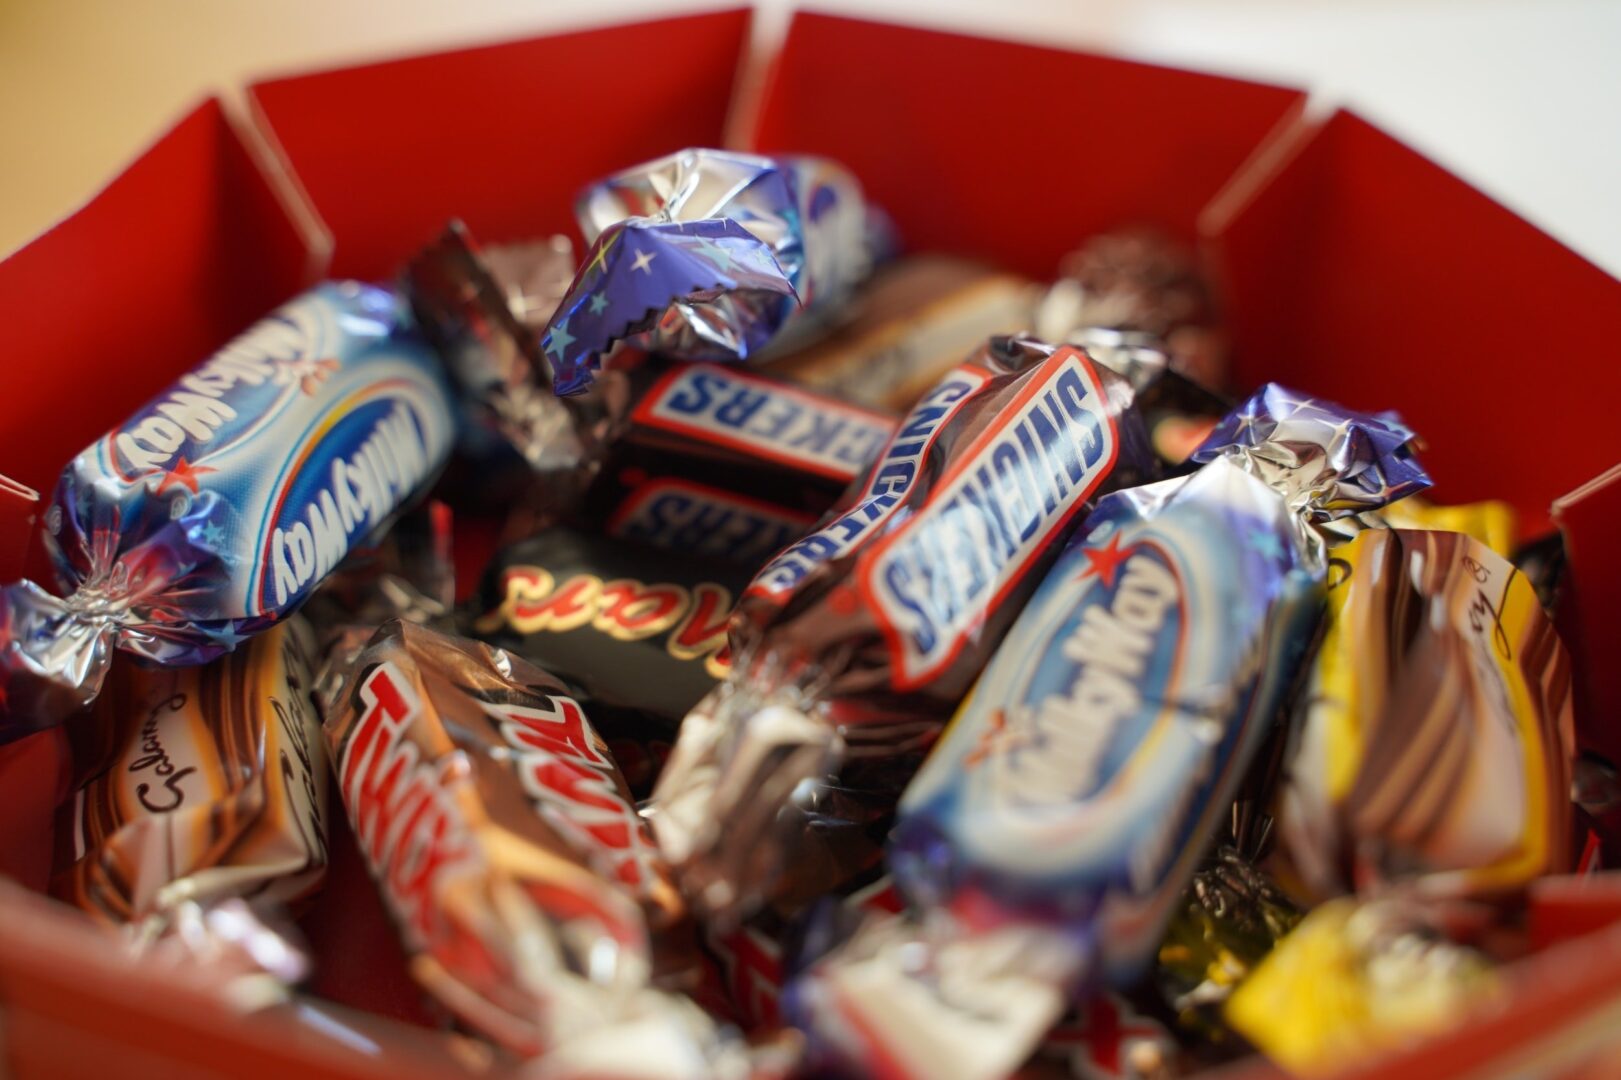 Closeup view of a bowl full of chocolates